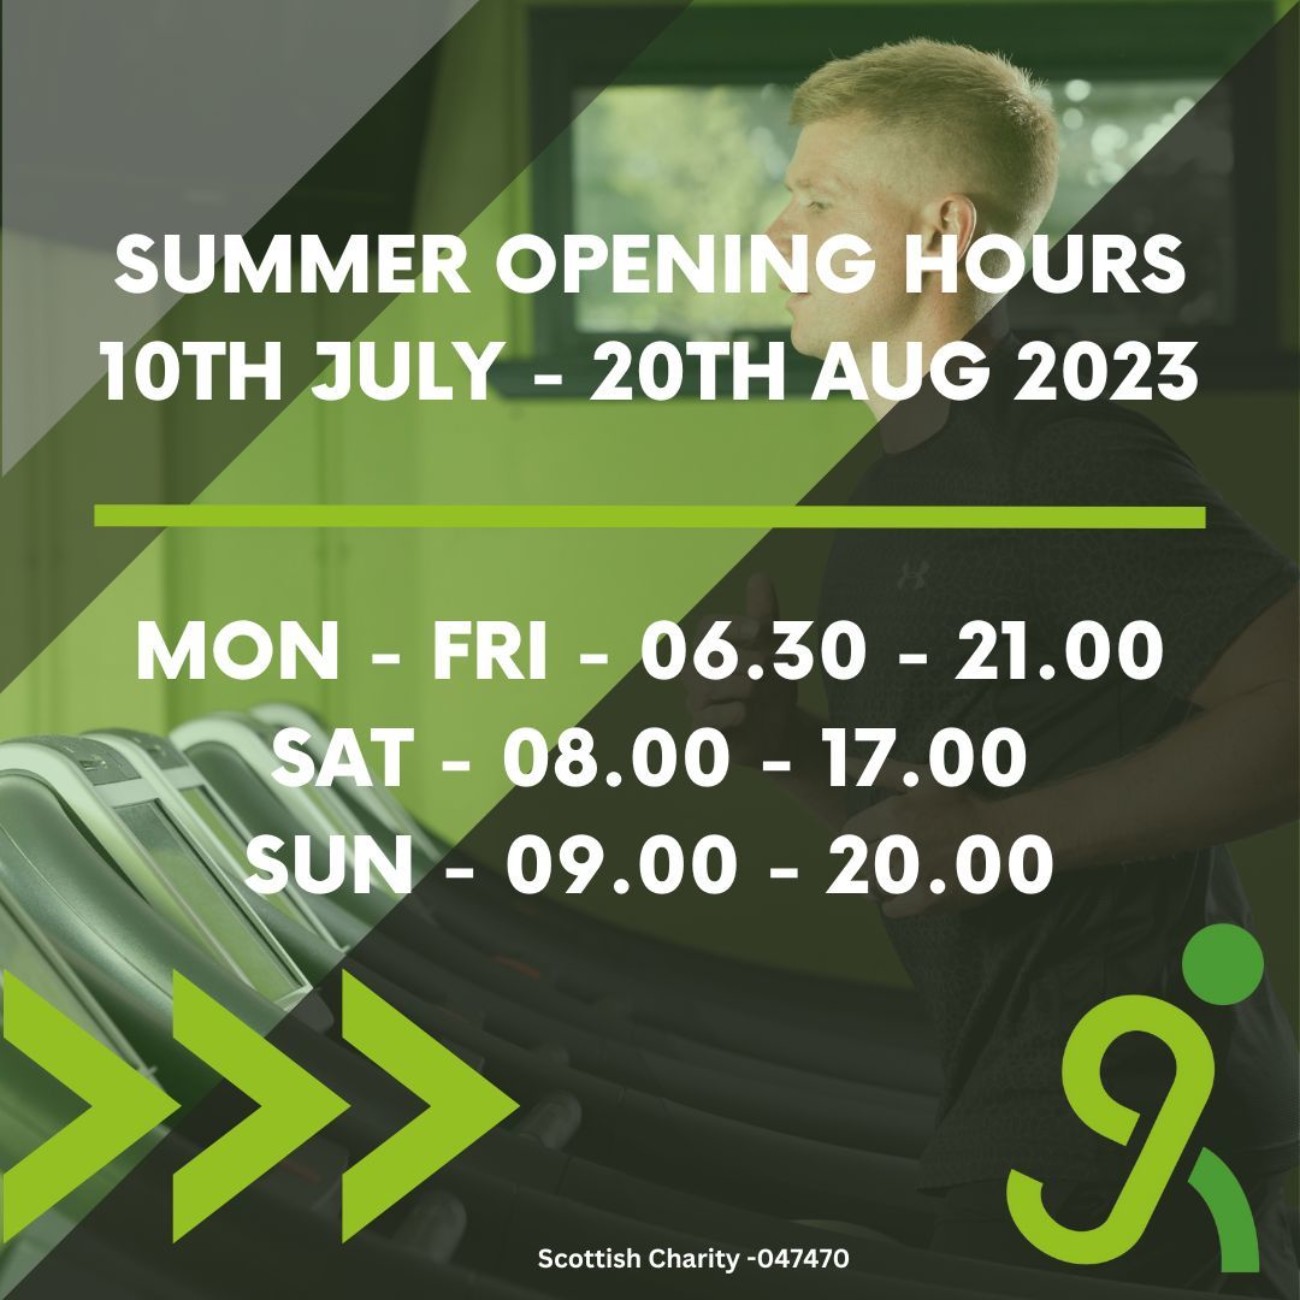 Summer Opening Hours 2023